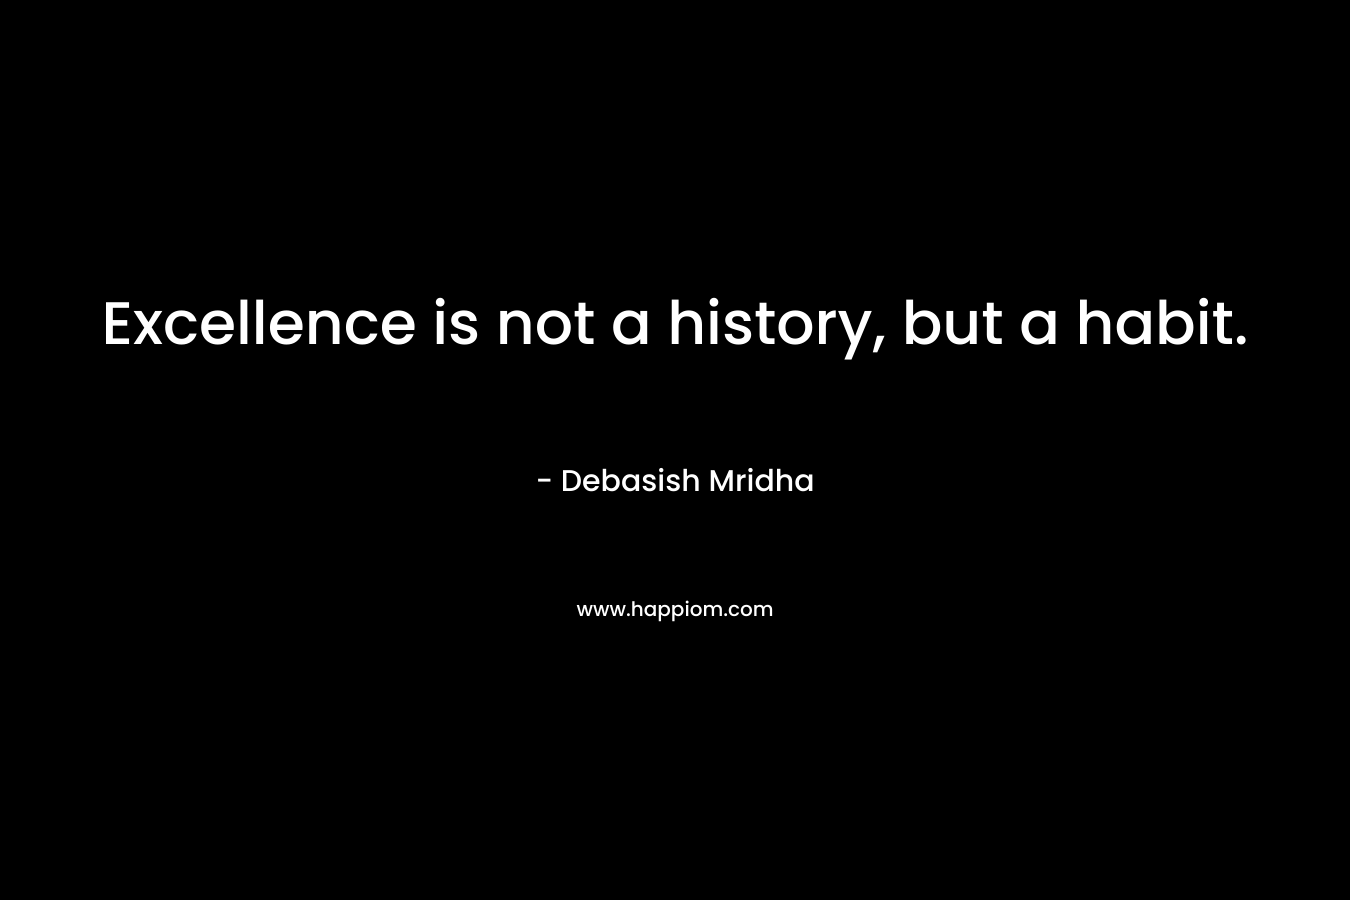 Excellence is not a history, but a habit.